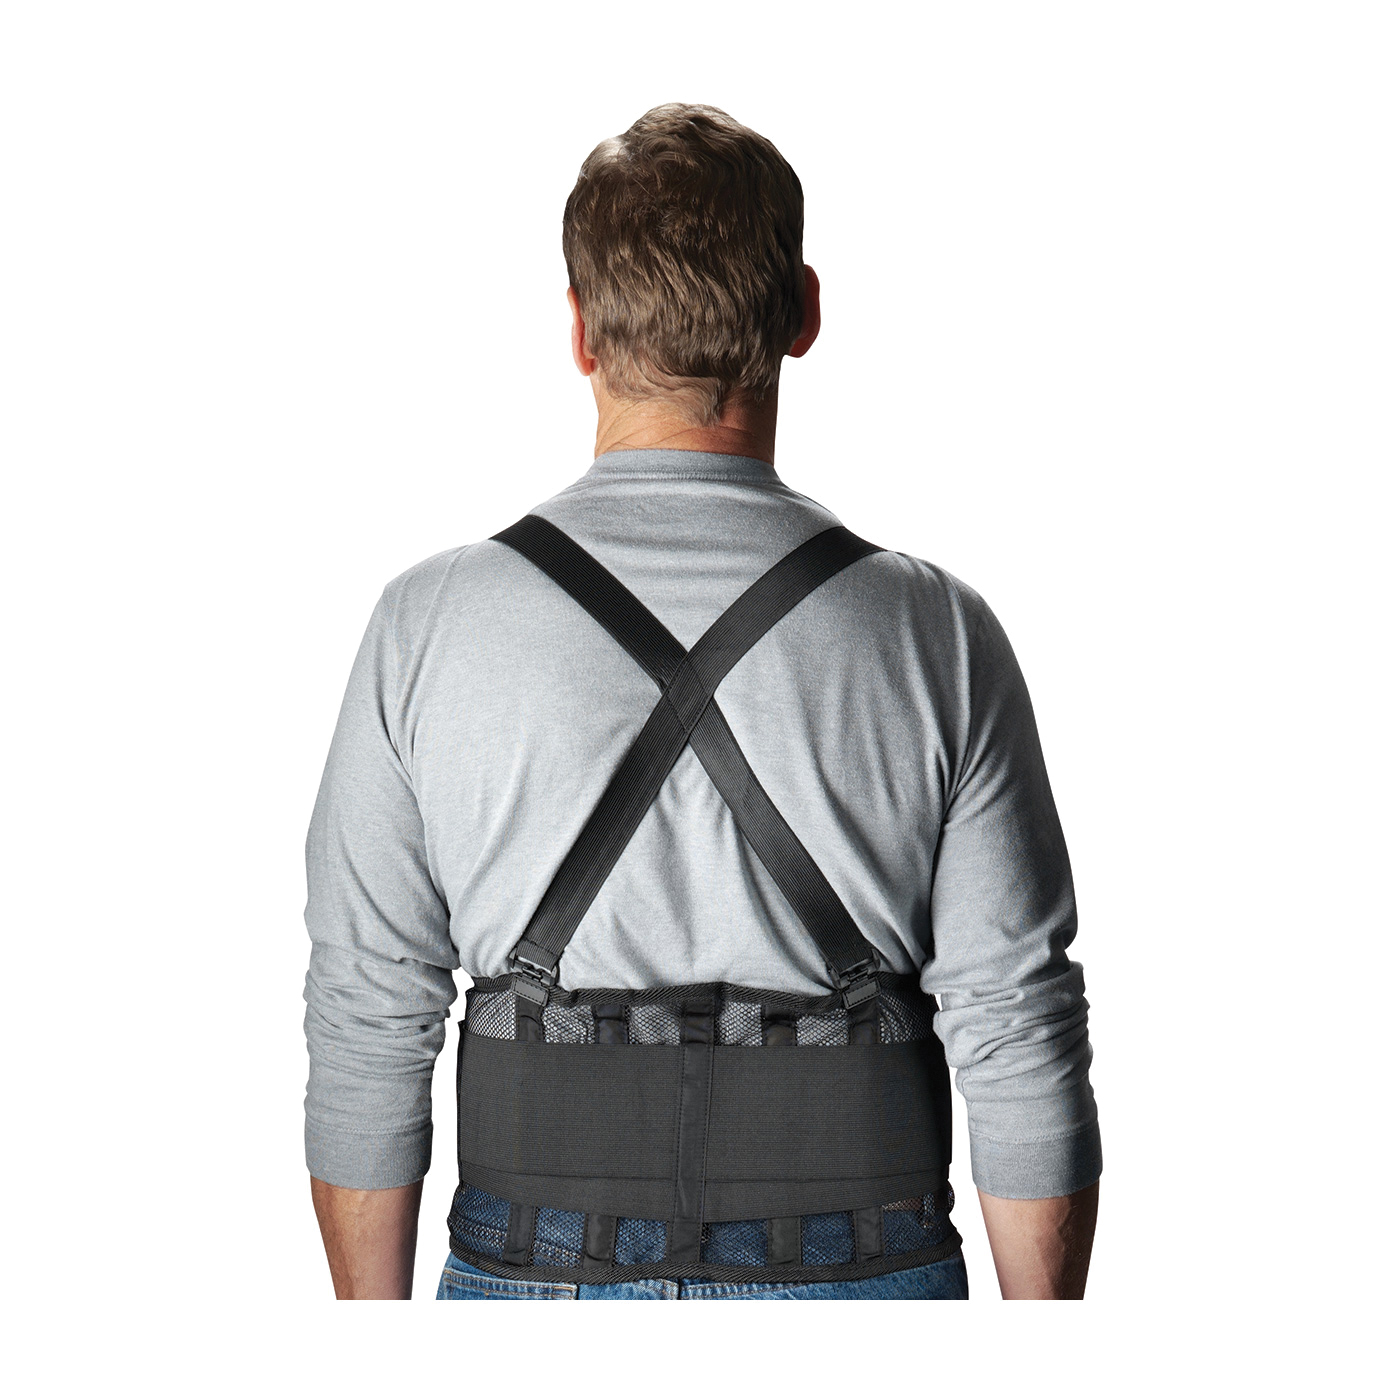 PIP® 290-440S Ergonomic Back Support Belt, S, 32 to 36 in Fits Waist, 9 in W, Nylon Mesh, Black, Hook and Loop Closure